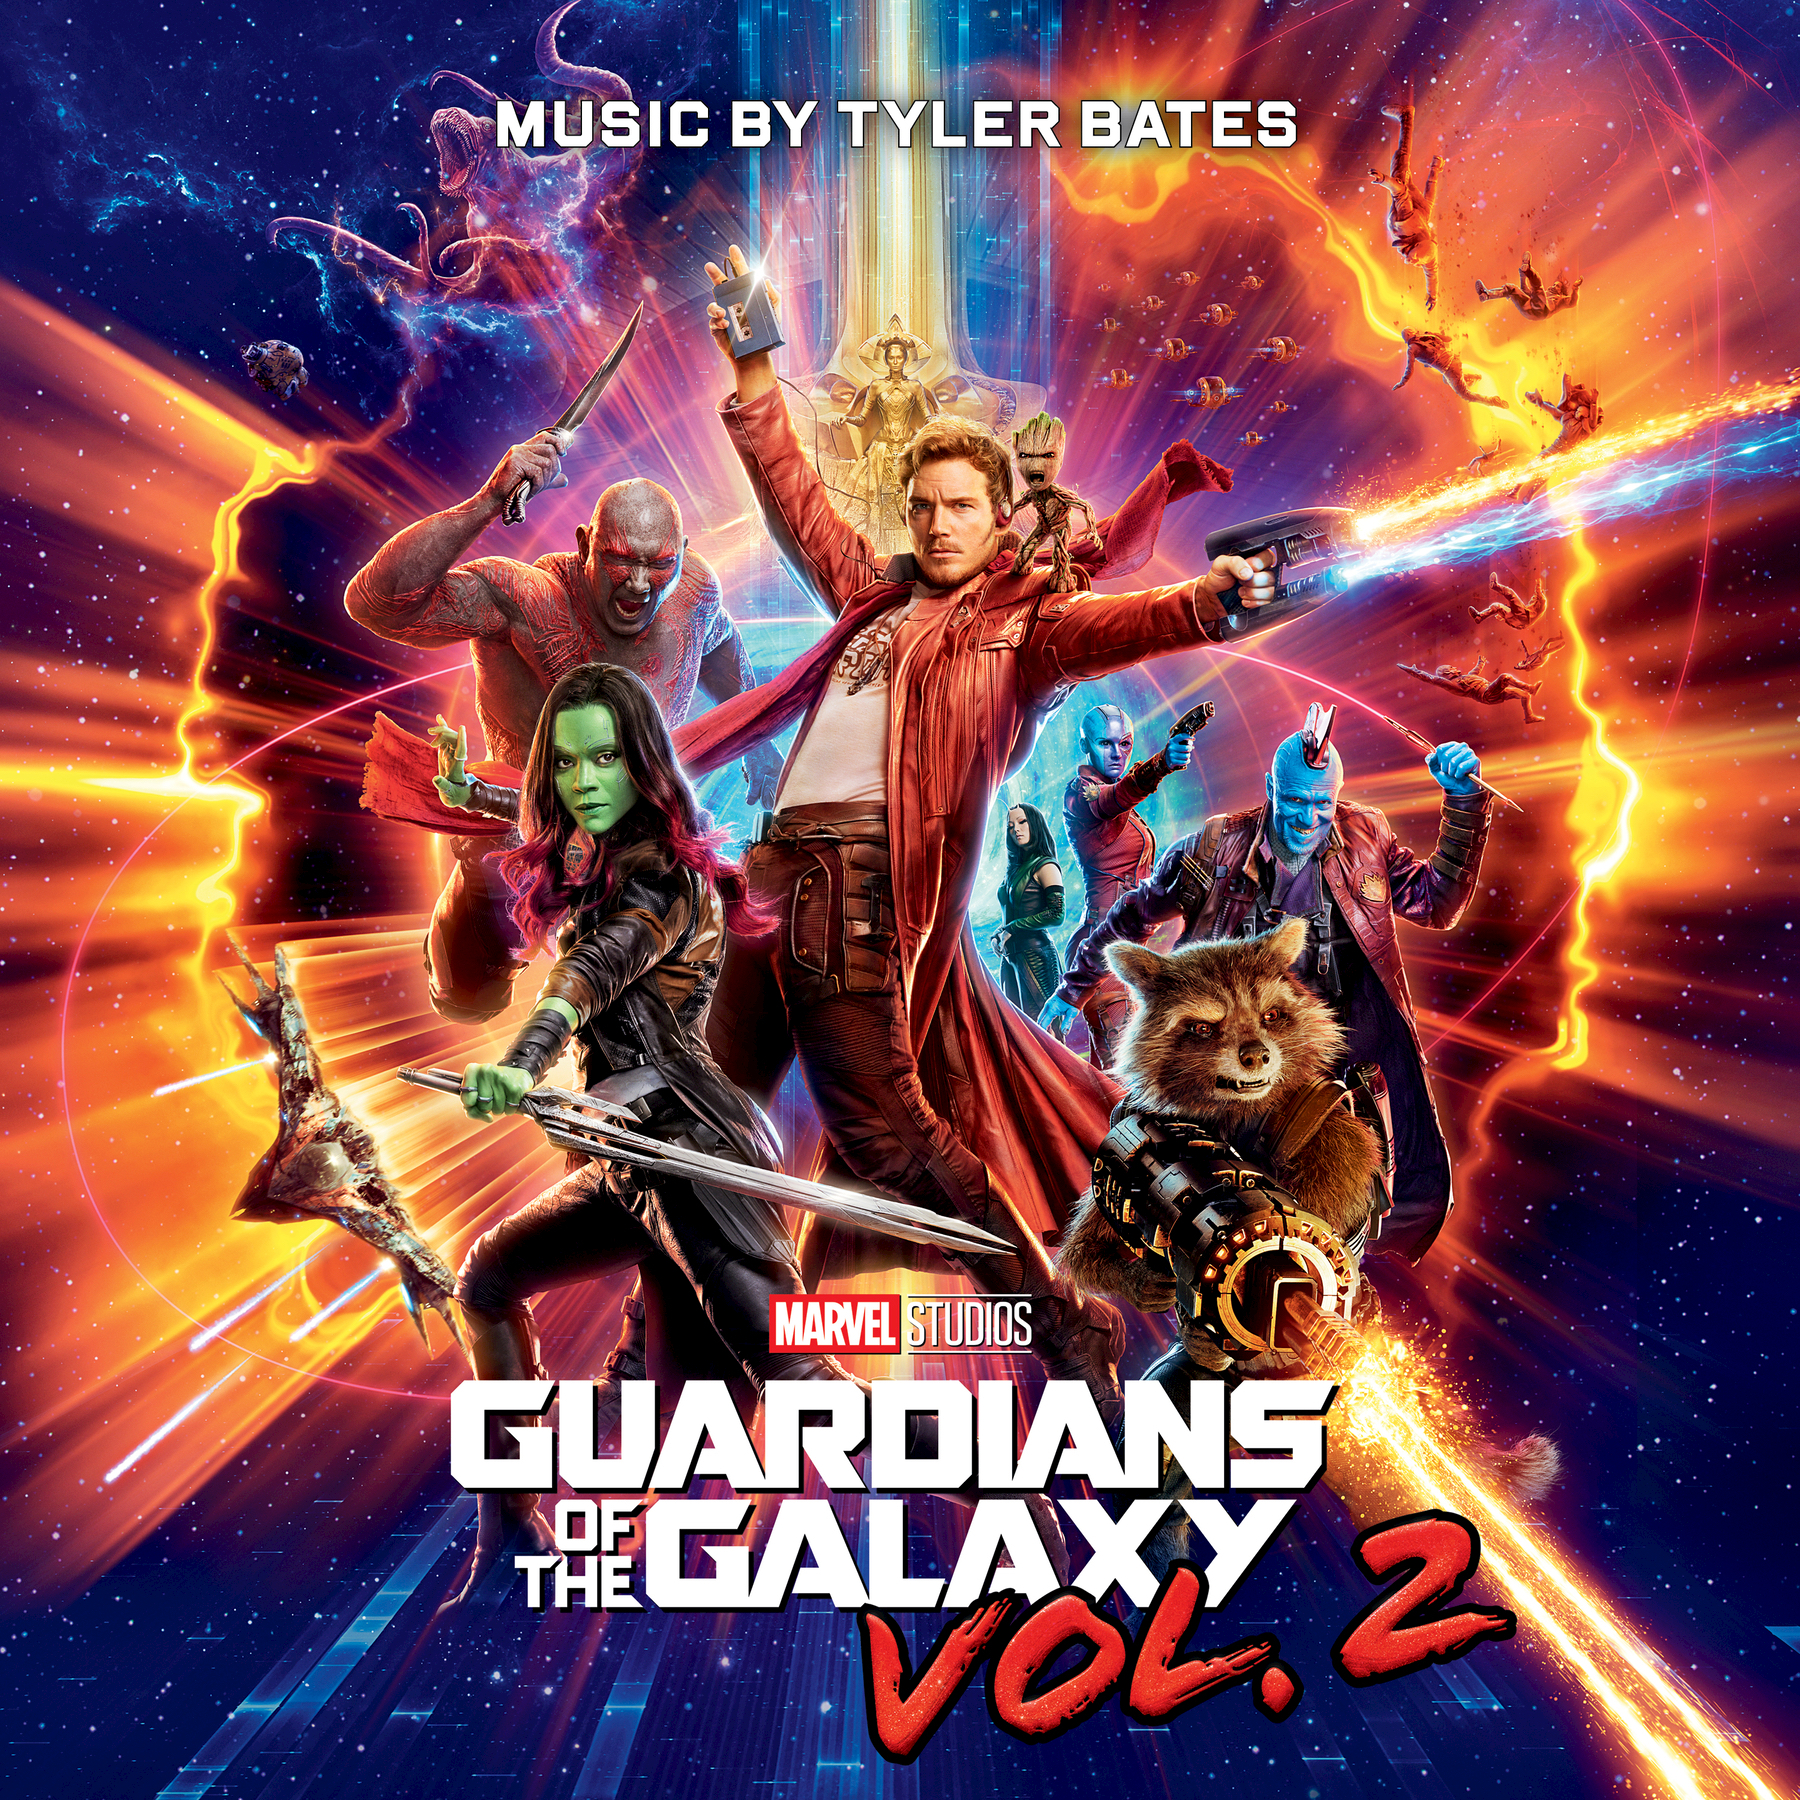 Guardians of the Galaxy Vol 2 download the new version for mac